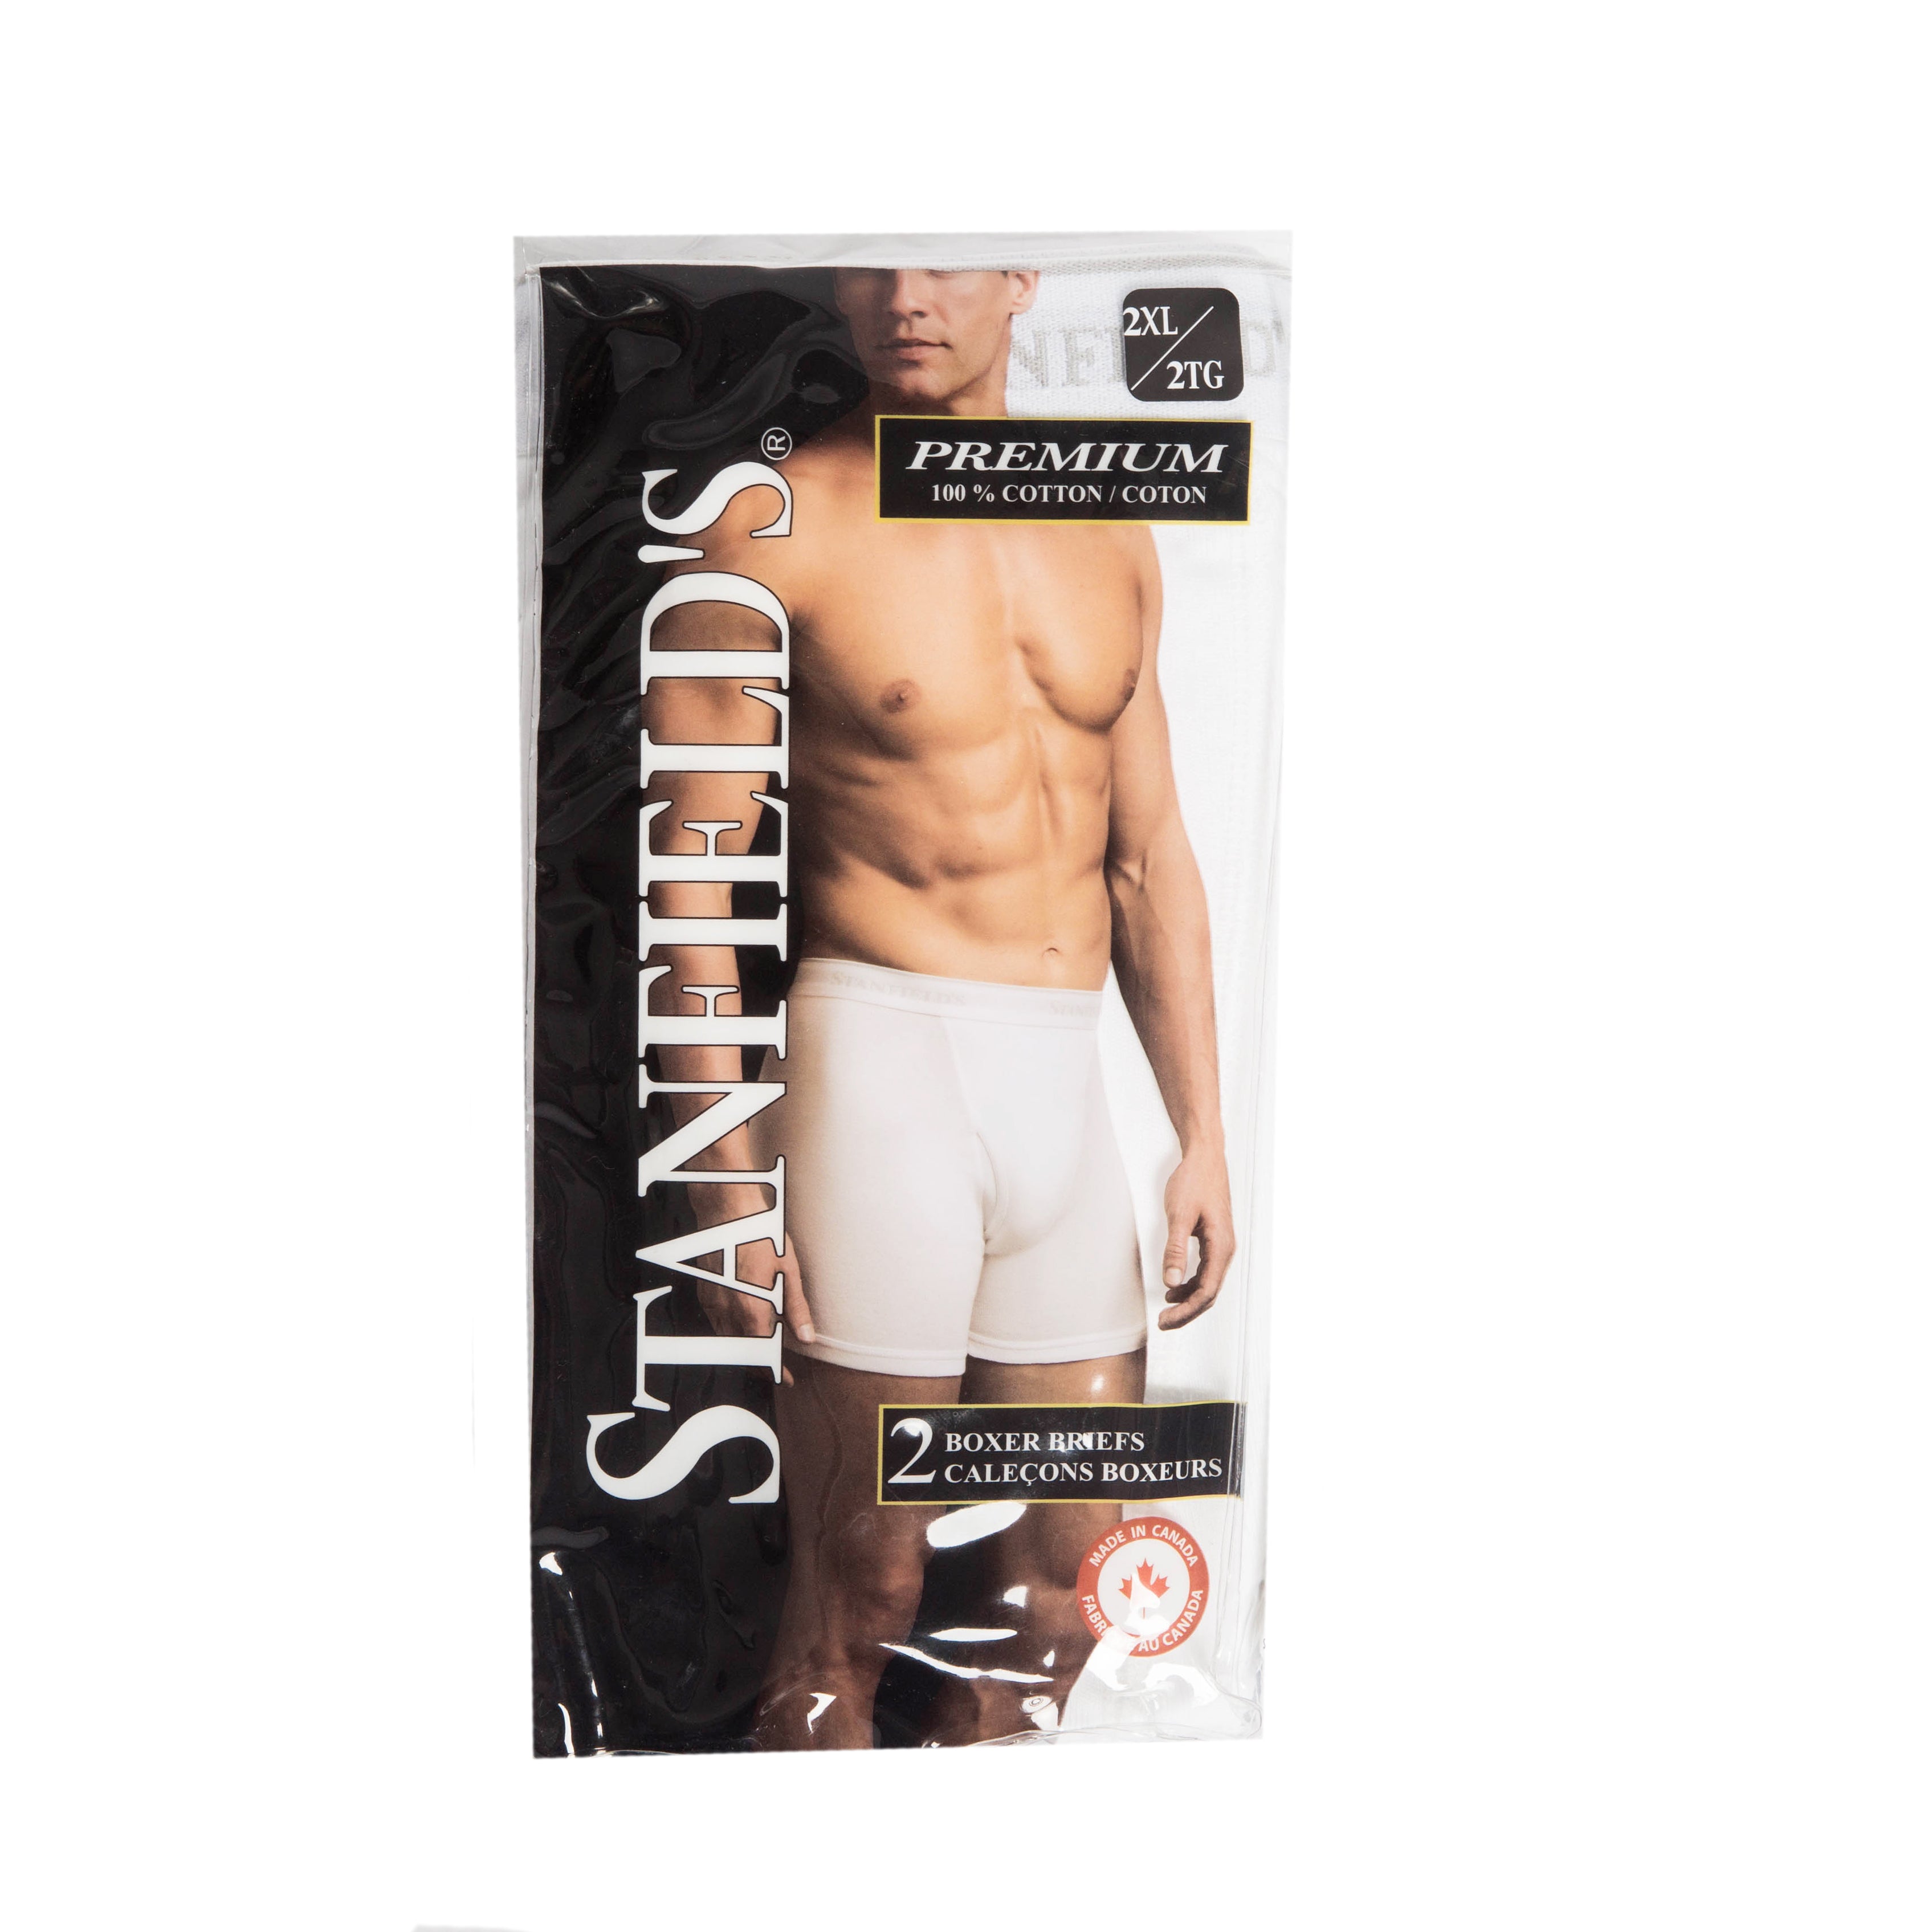 Stanfield's 2-Pack Adult Mens Cotton Stretch Long Boxer Briefs